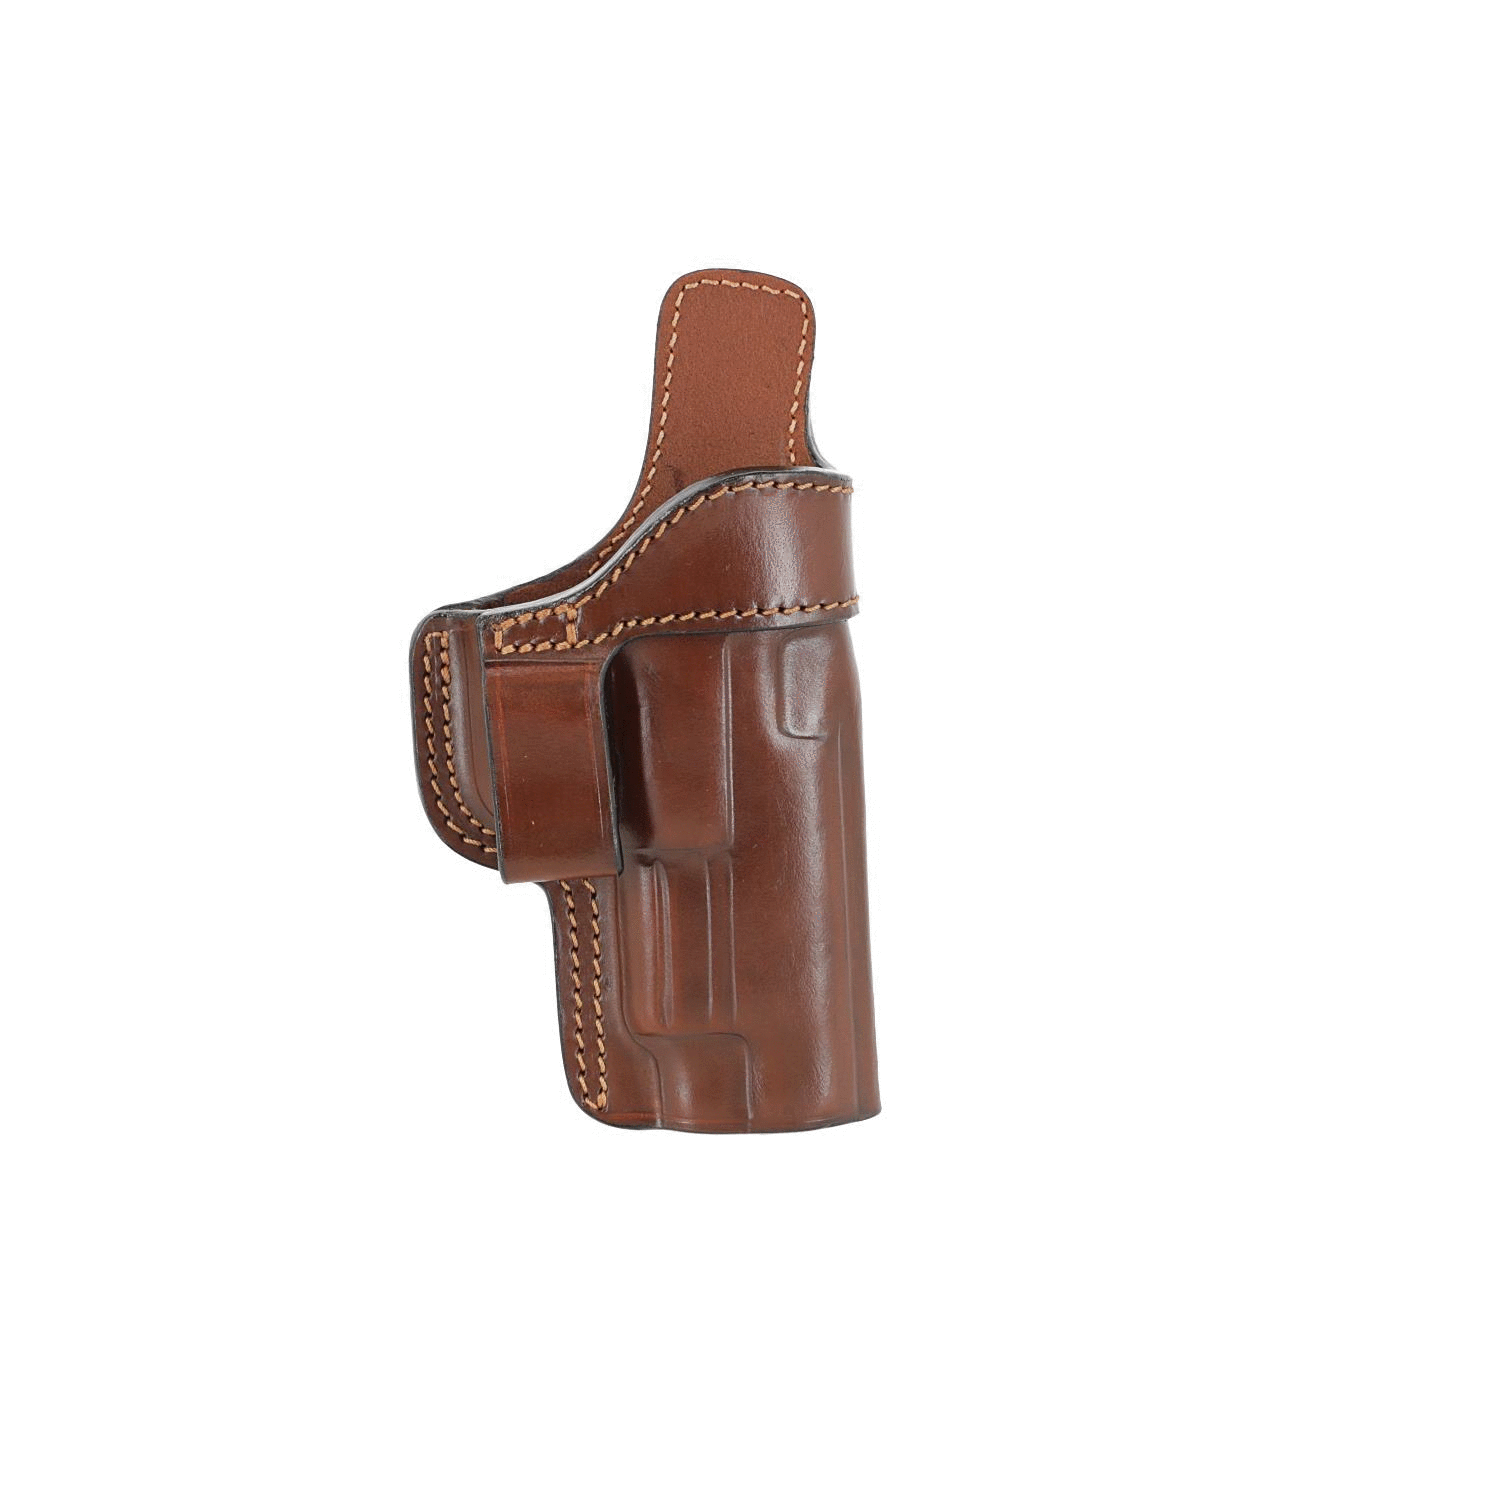 Pancake style IWB concealed open top leather holster